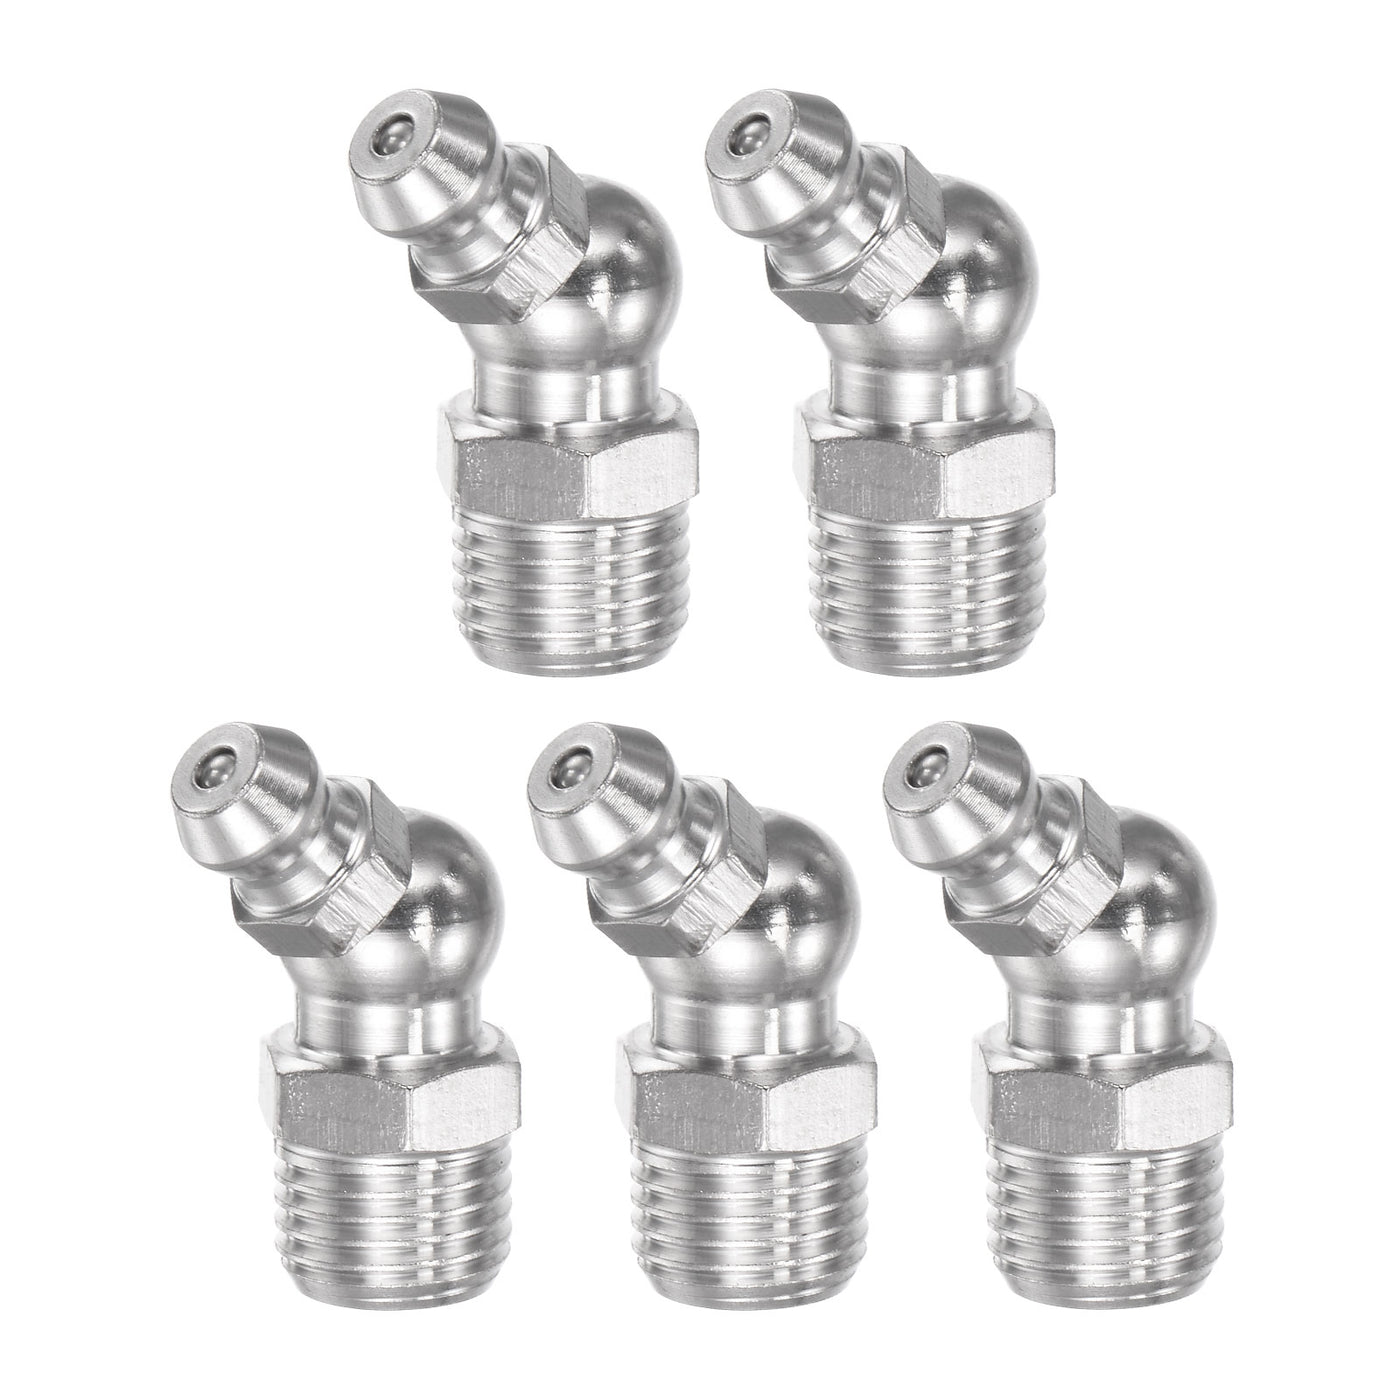 Uxcell Uxcell 201 Stainless Steel 45 Degree Hydraulic Grease Fitting M6 x 1mm Thread, 5Pcs